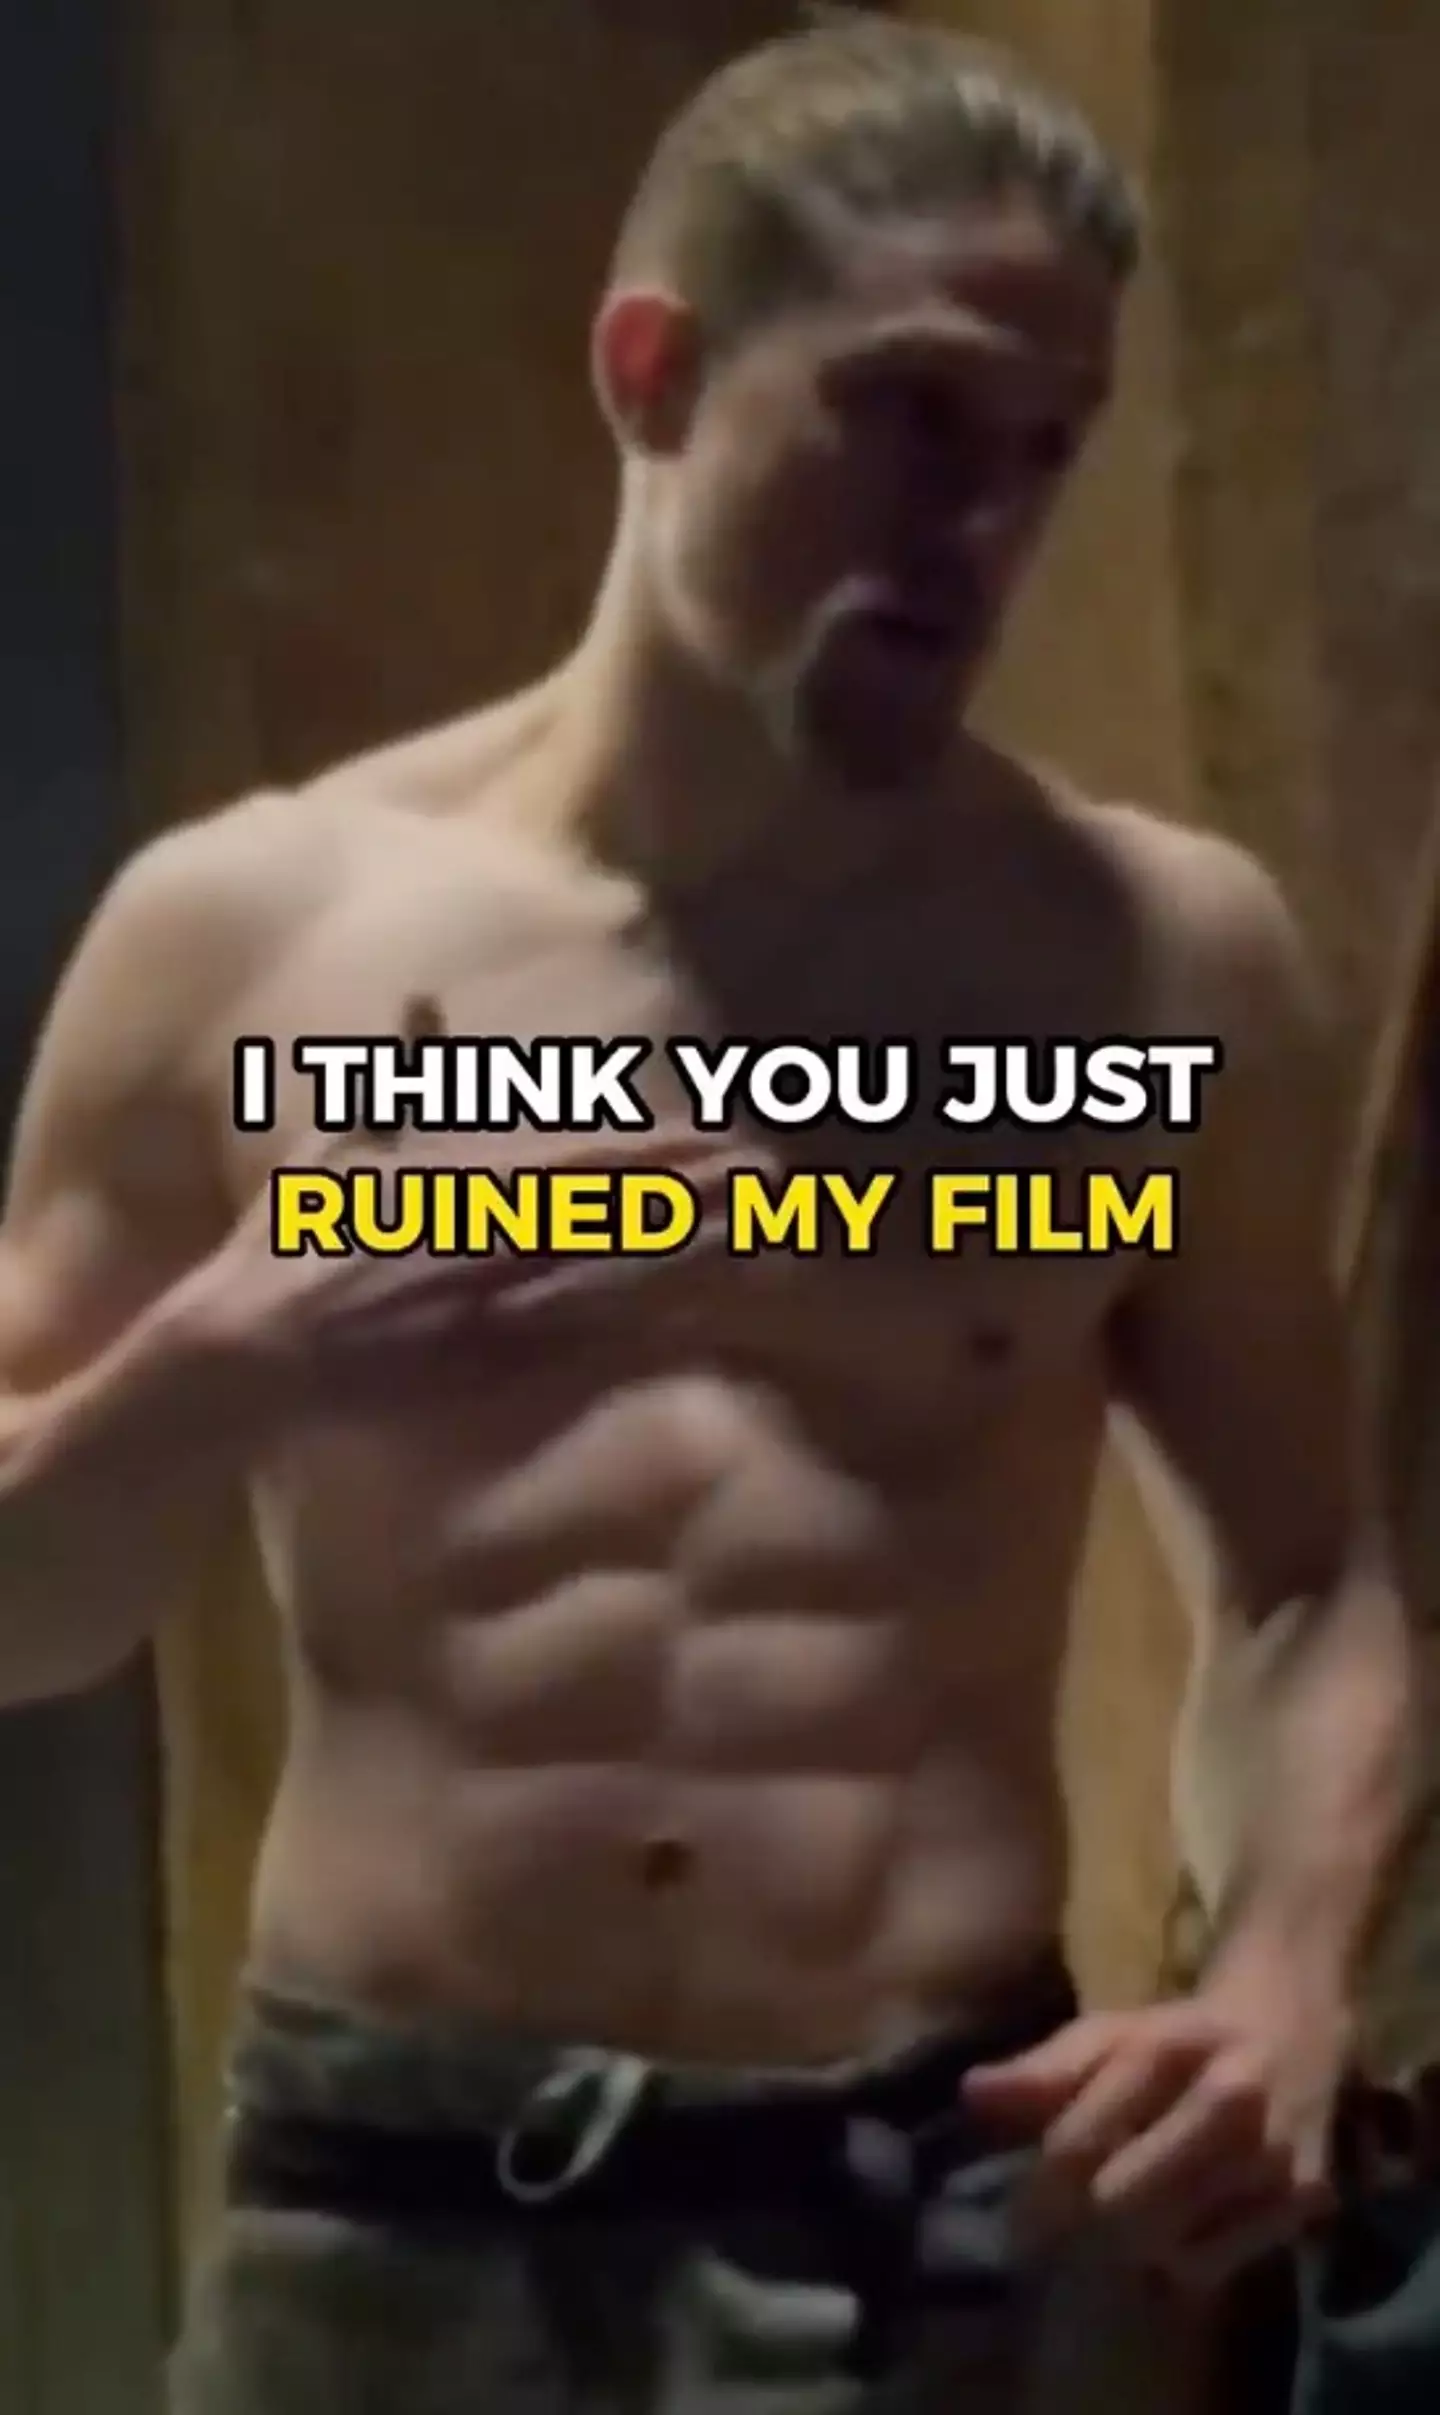 The Lost City of Z director James Gray was reduced to tears seeing Charlie Hunnam's physique.